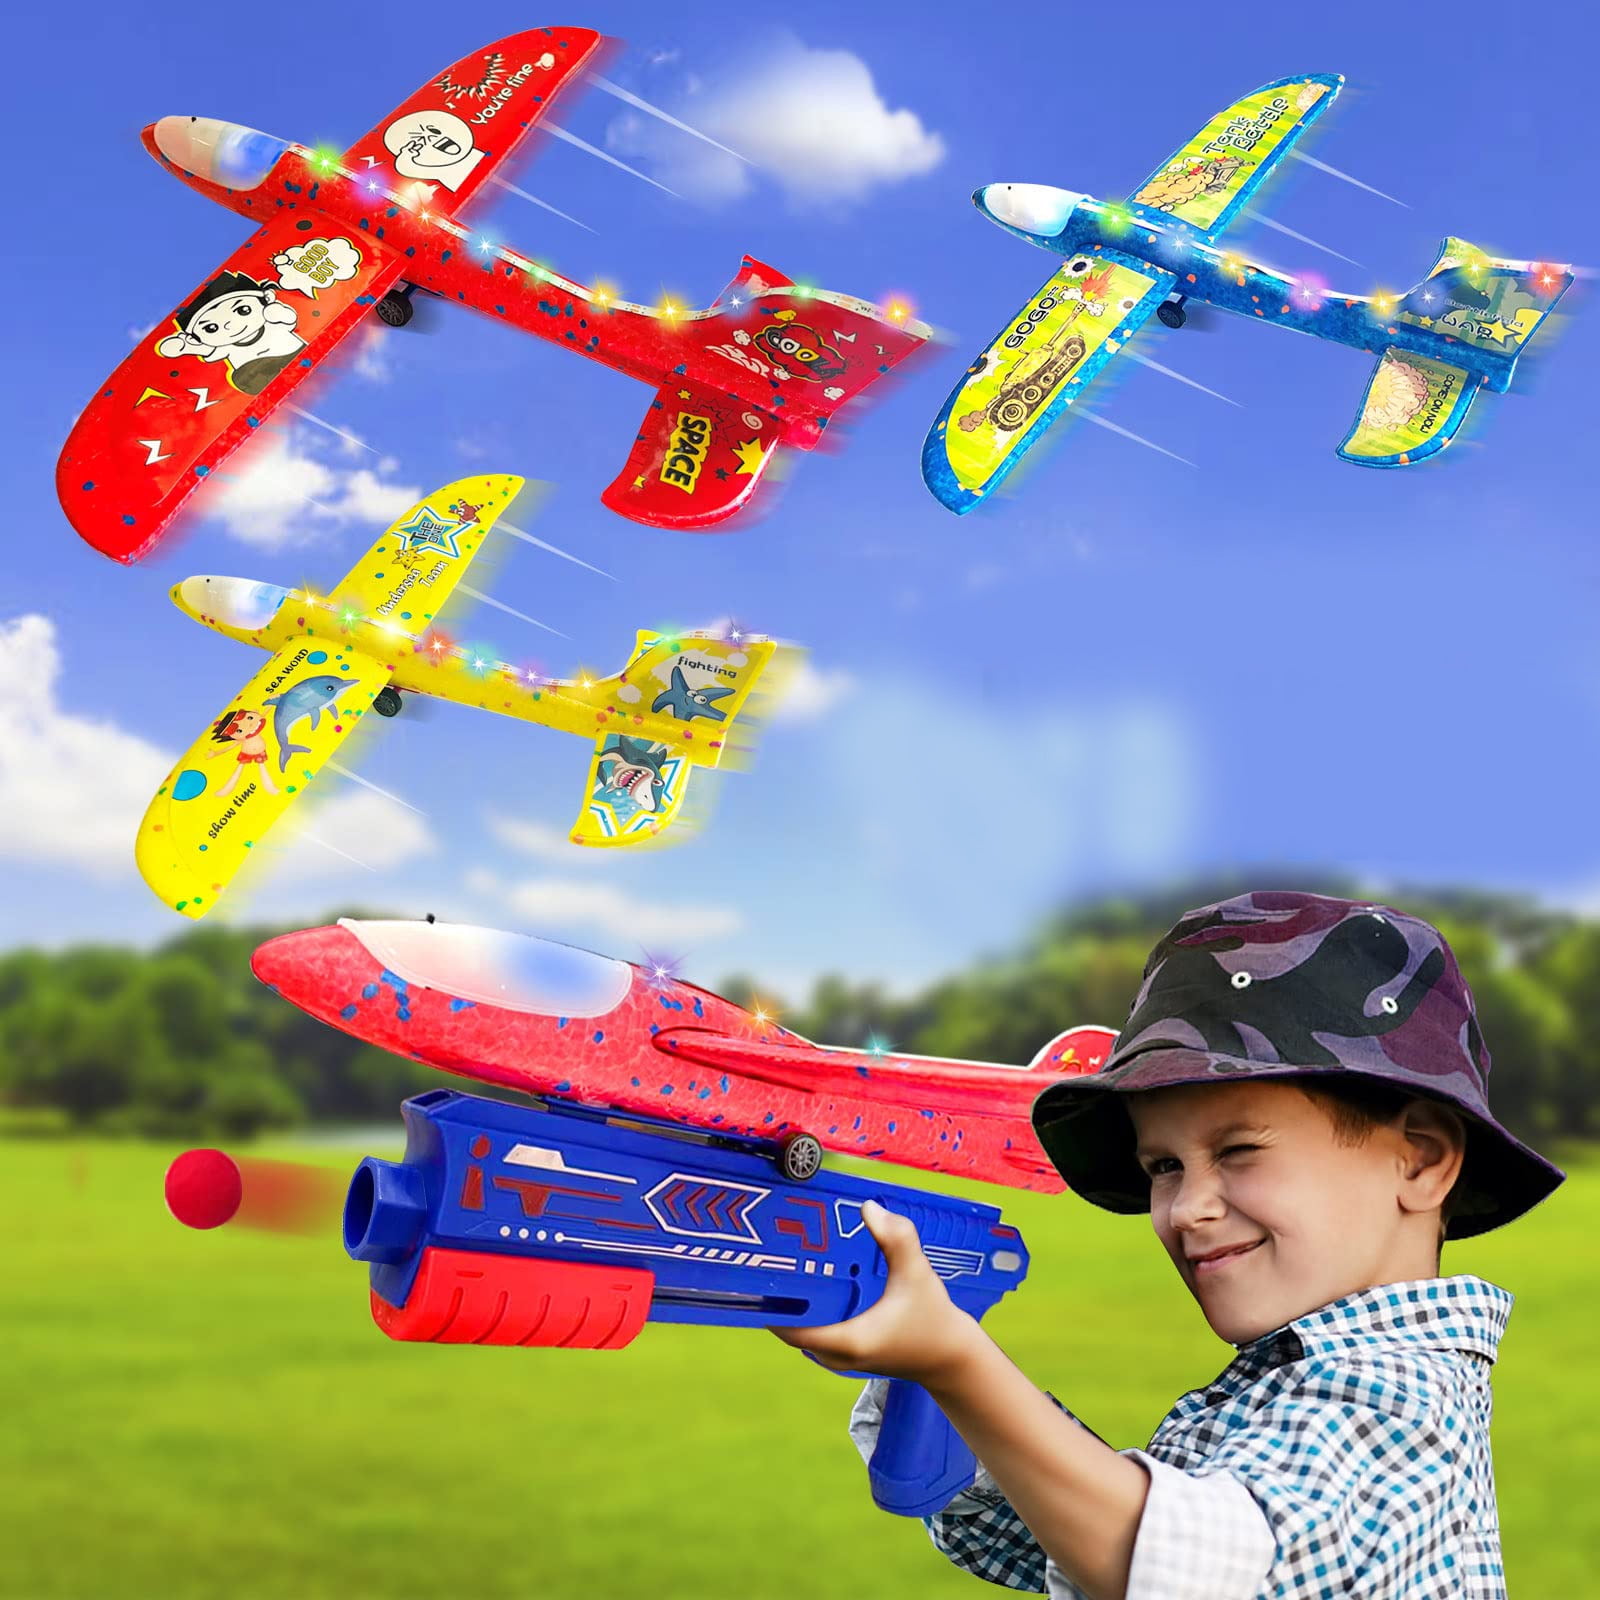 Airplane Launcher Toys, Foam Glider Plane Christmas Stocking Stuffers Toys  for Boys, Outdoor Flying Toys Birthday Kids Gifts for 4 5 6 7 8 9 10 12  Year Old Boys Girls Yard Games 